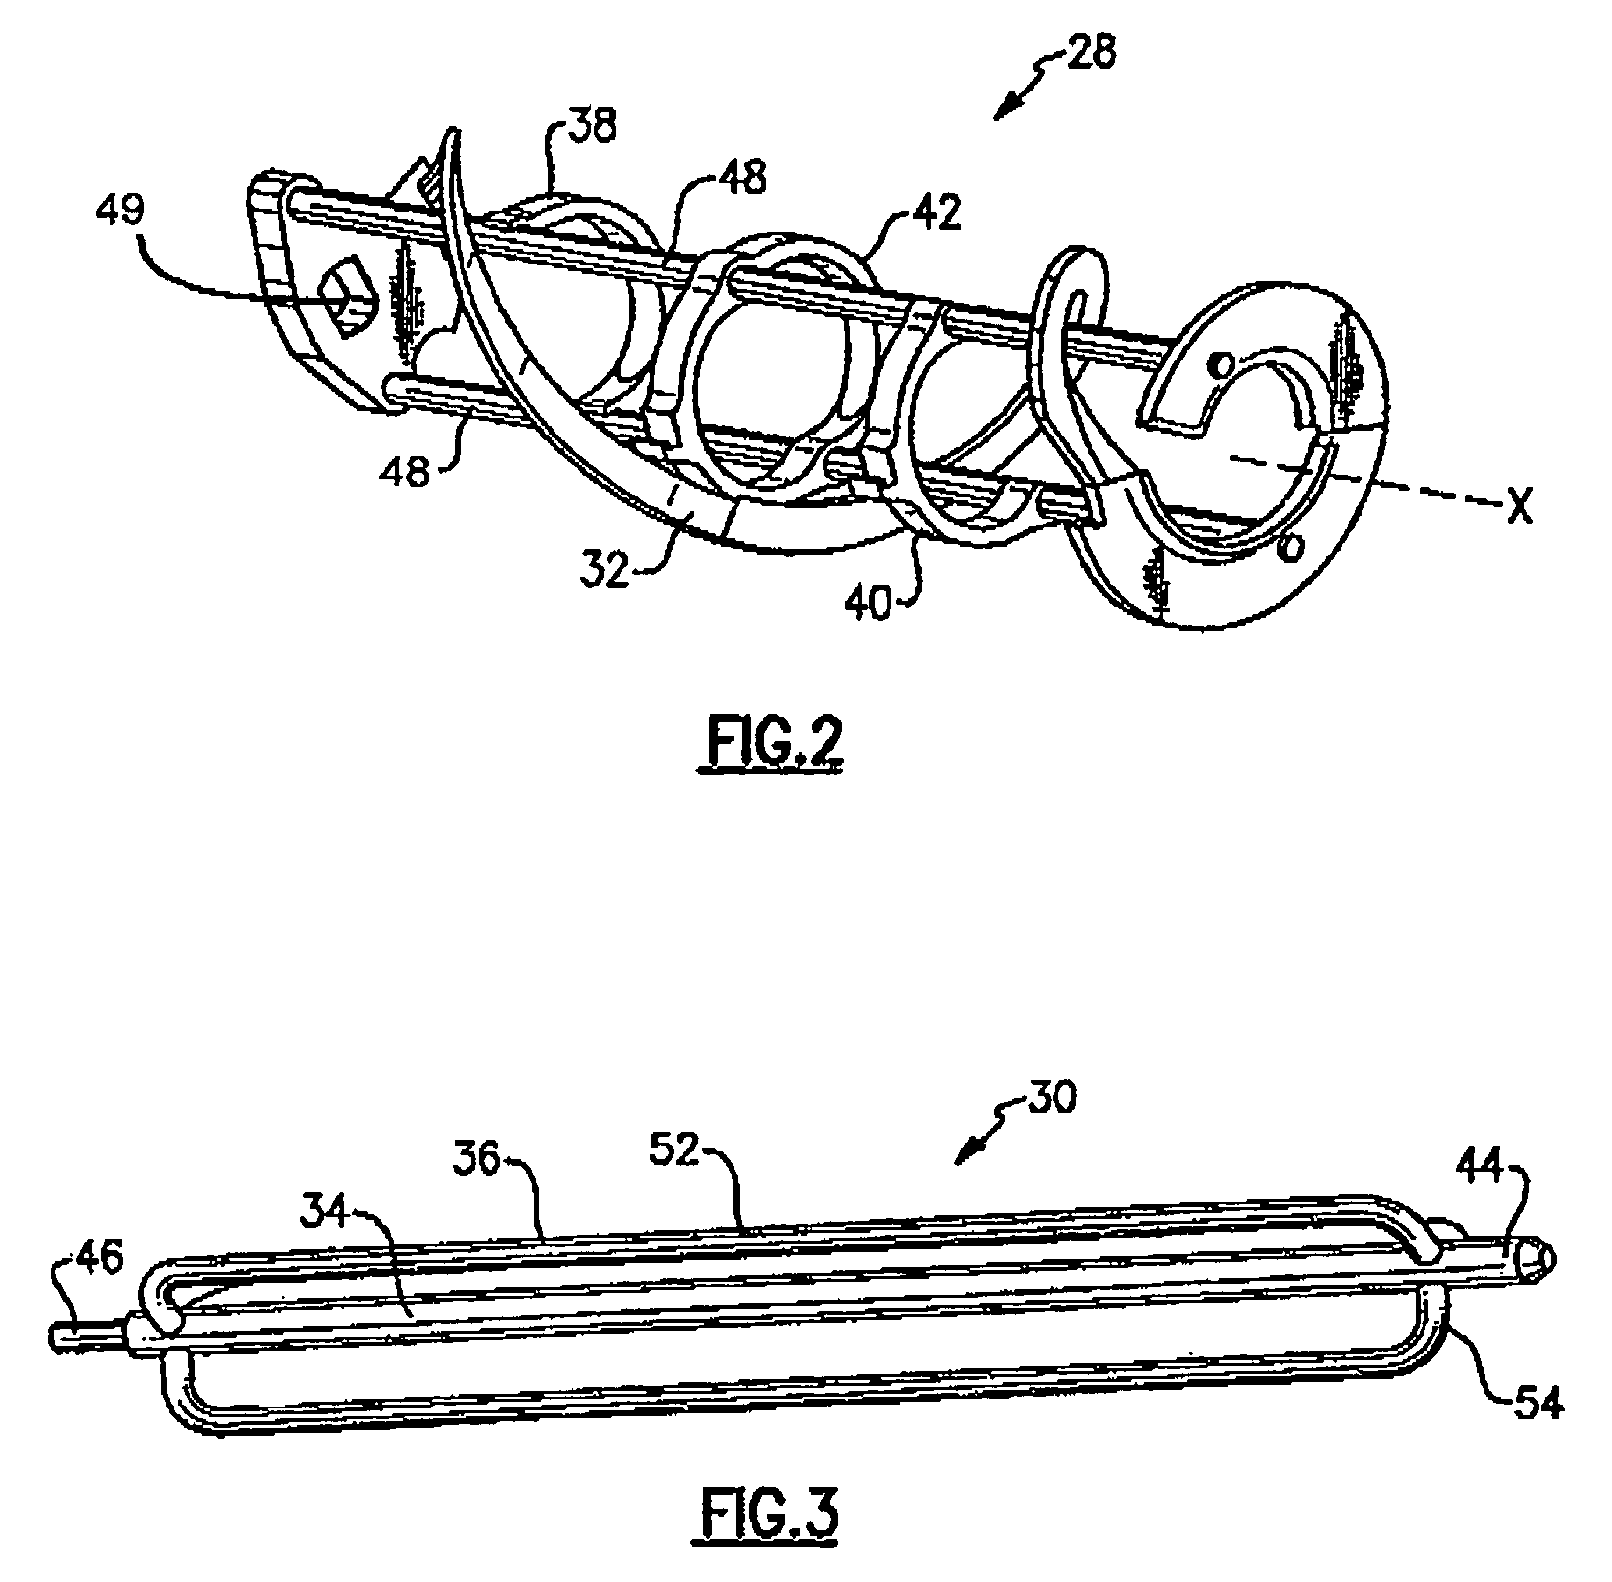 Frozen carbonated beverage apparatus for preparing a low Brix frozen carbonated beverage